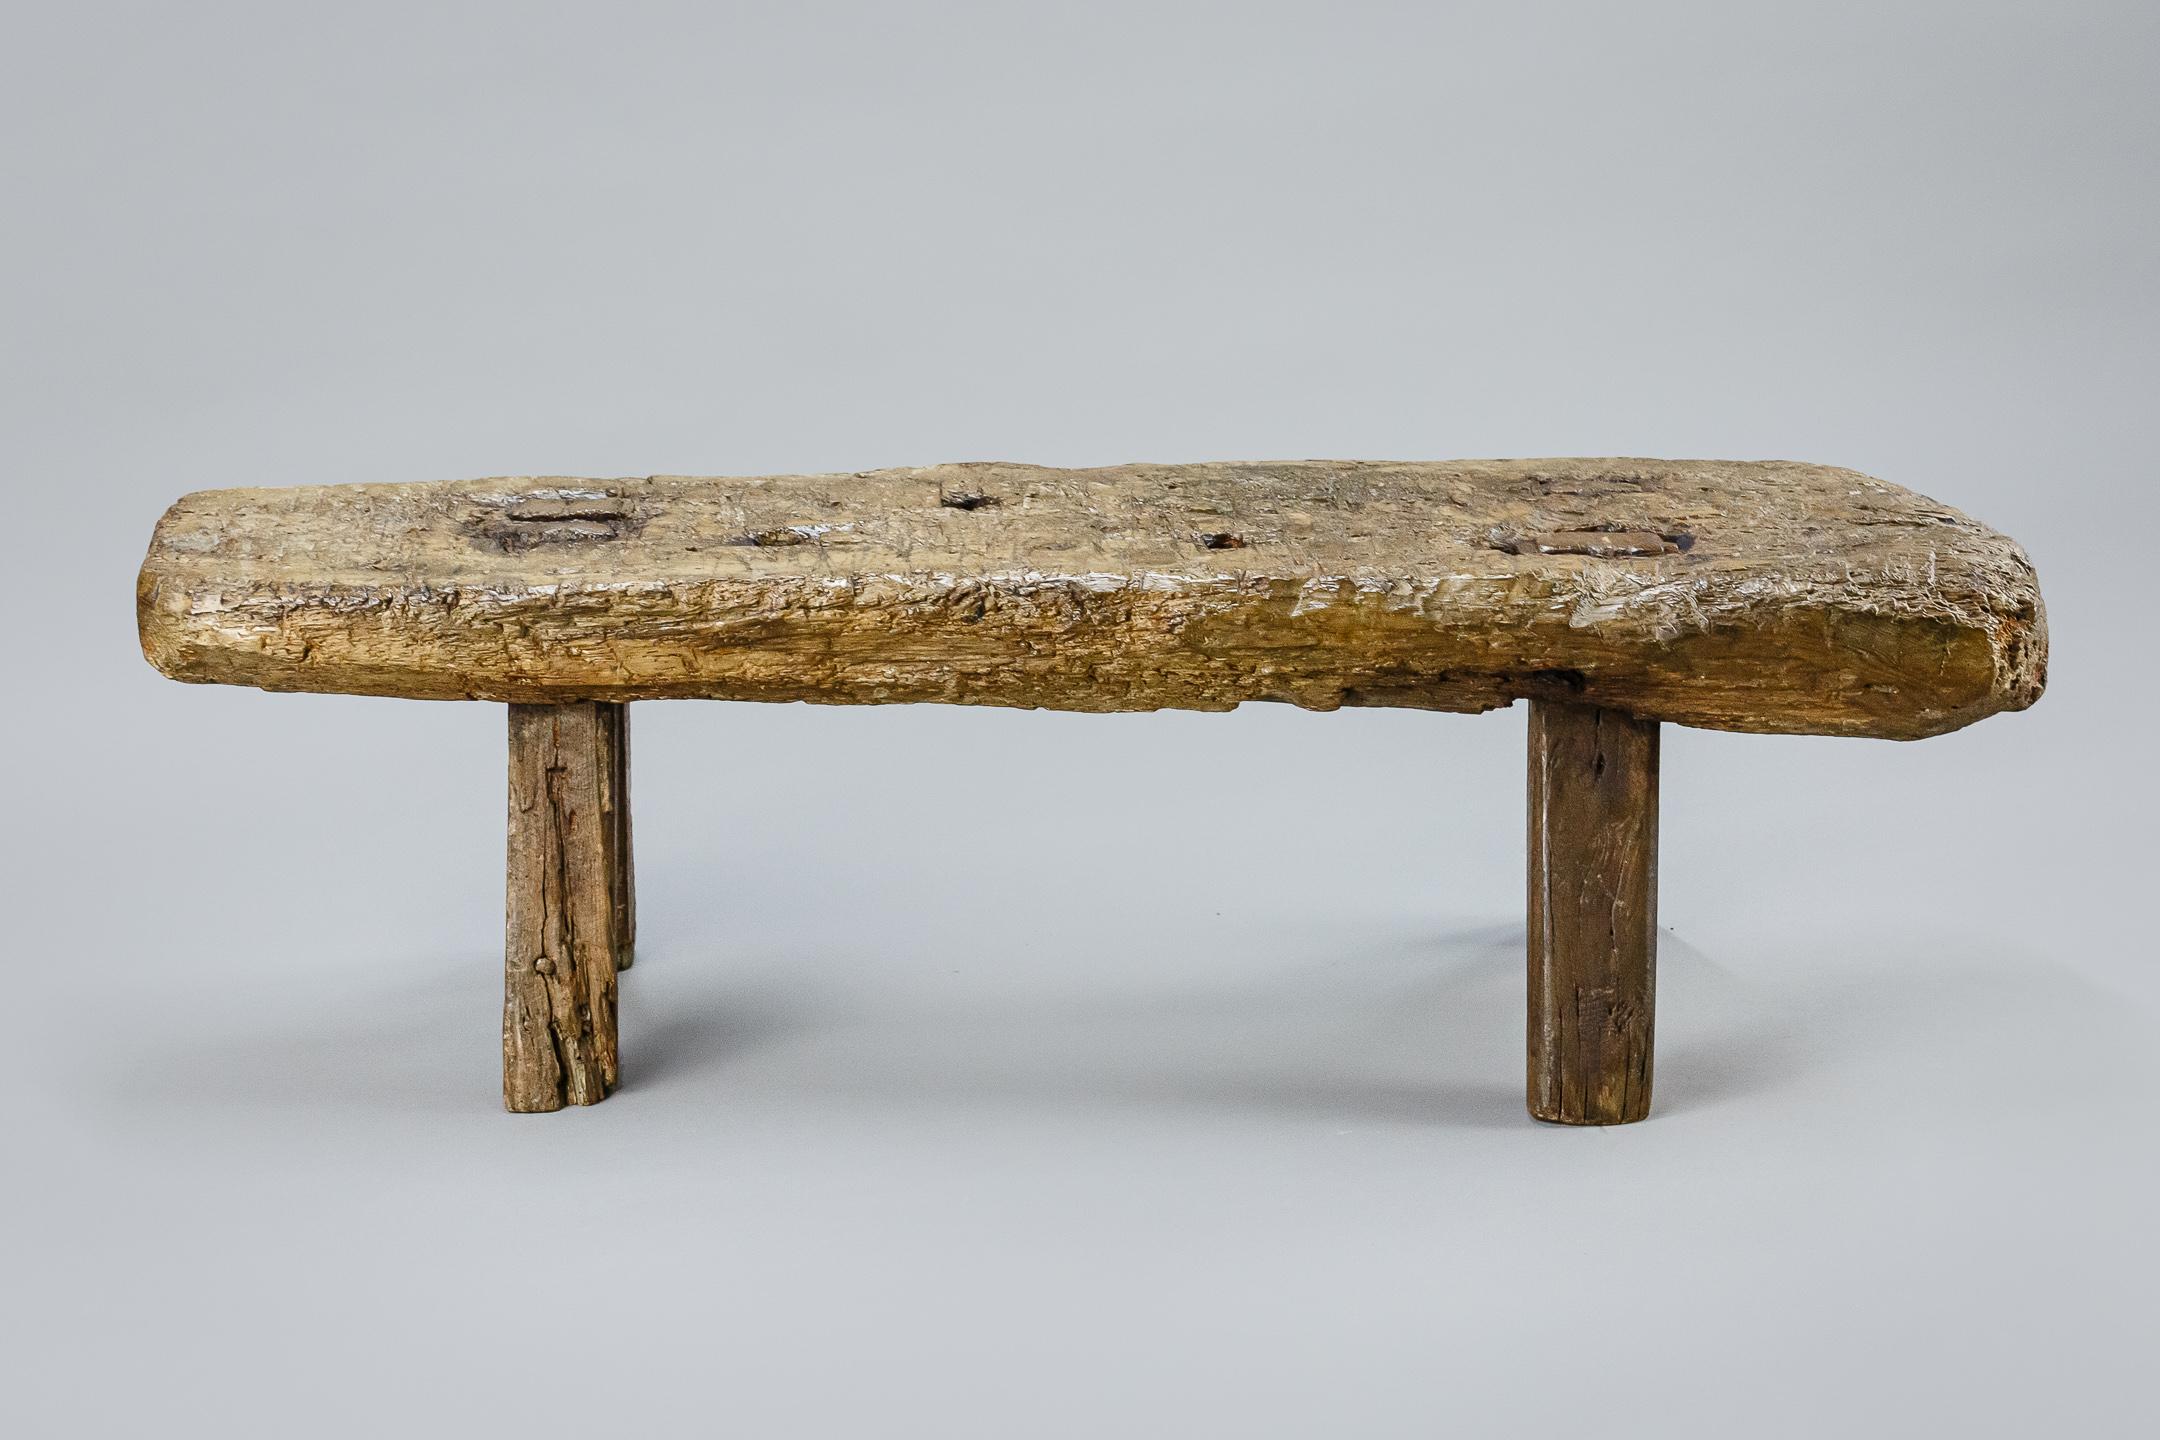 19th century pig bench. Welsh. Heavily used and patinated. Evidence of historical worm. Circa 1880.